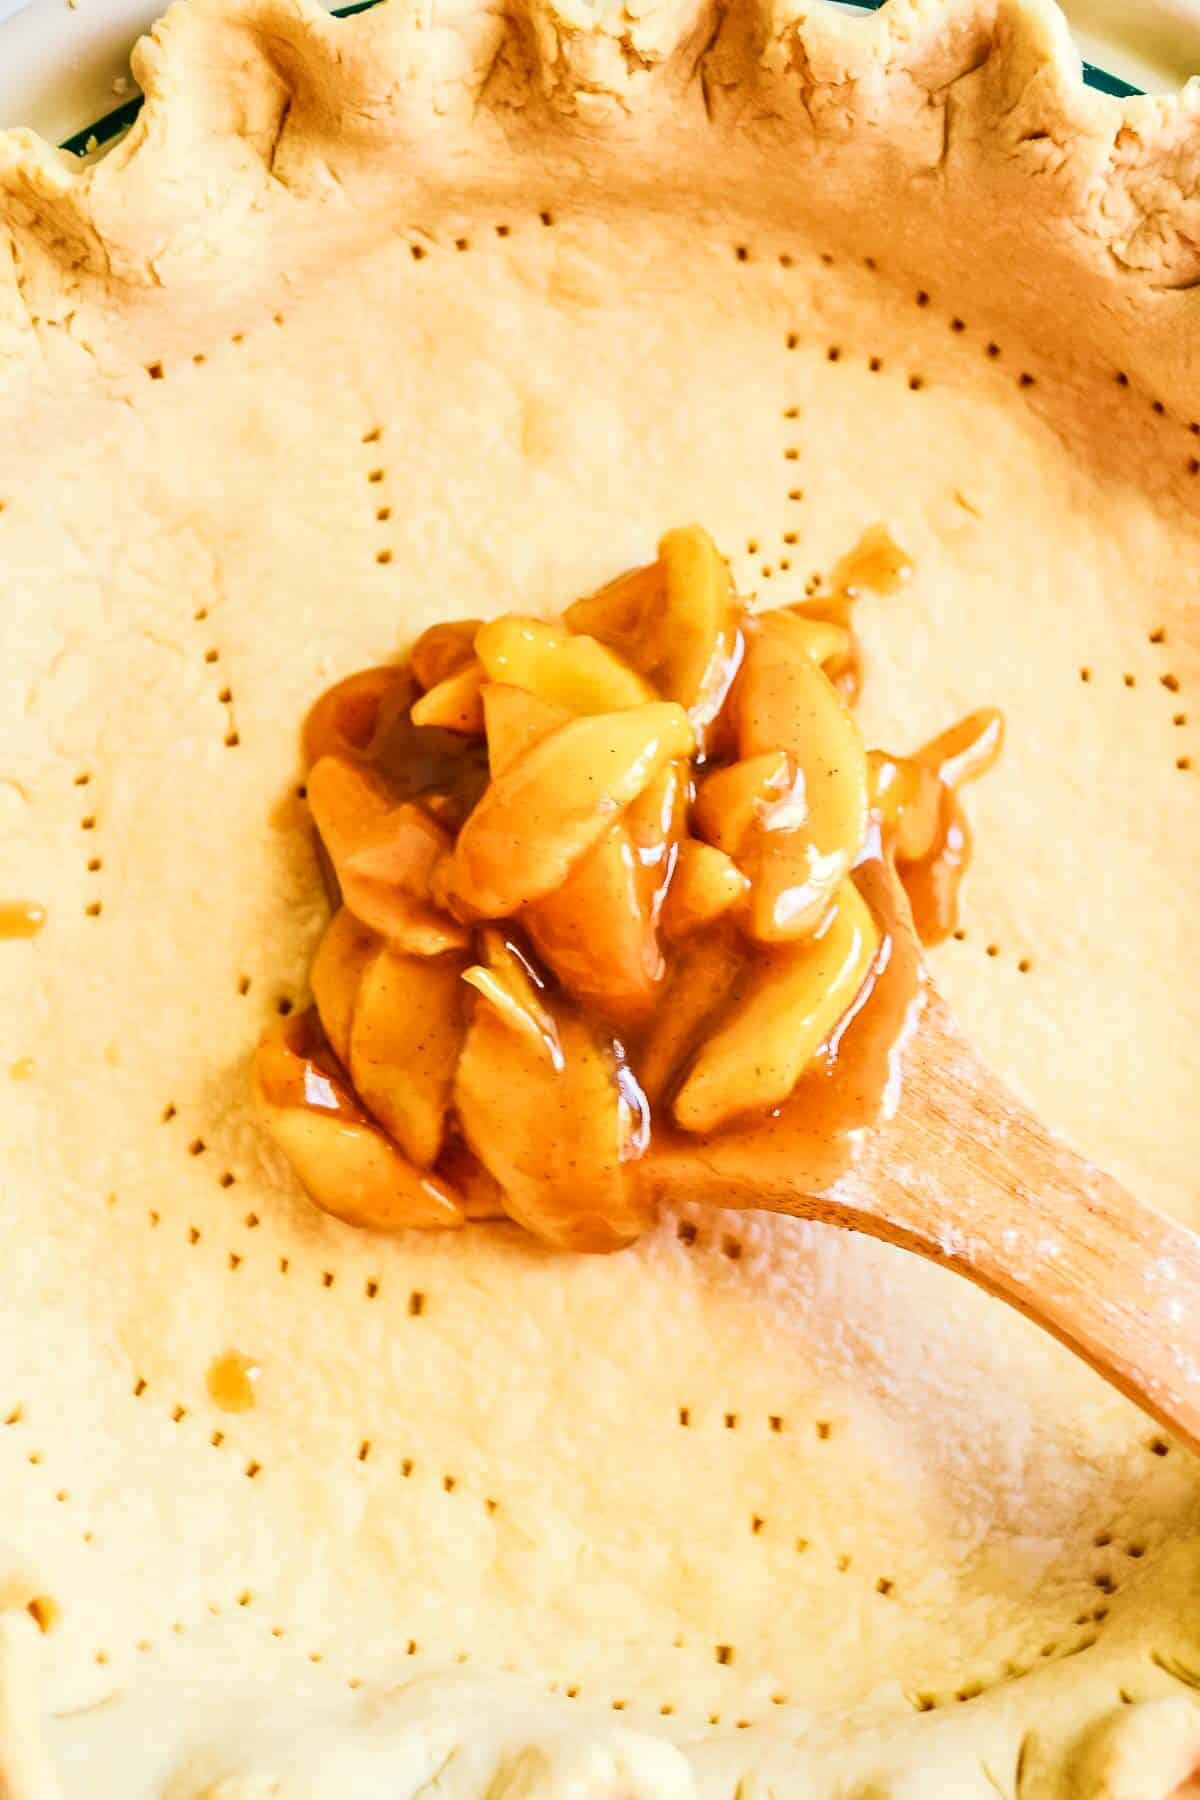 Caramel apple pie filling being spooned into a pie crust.